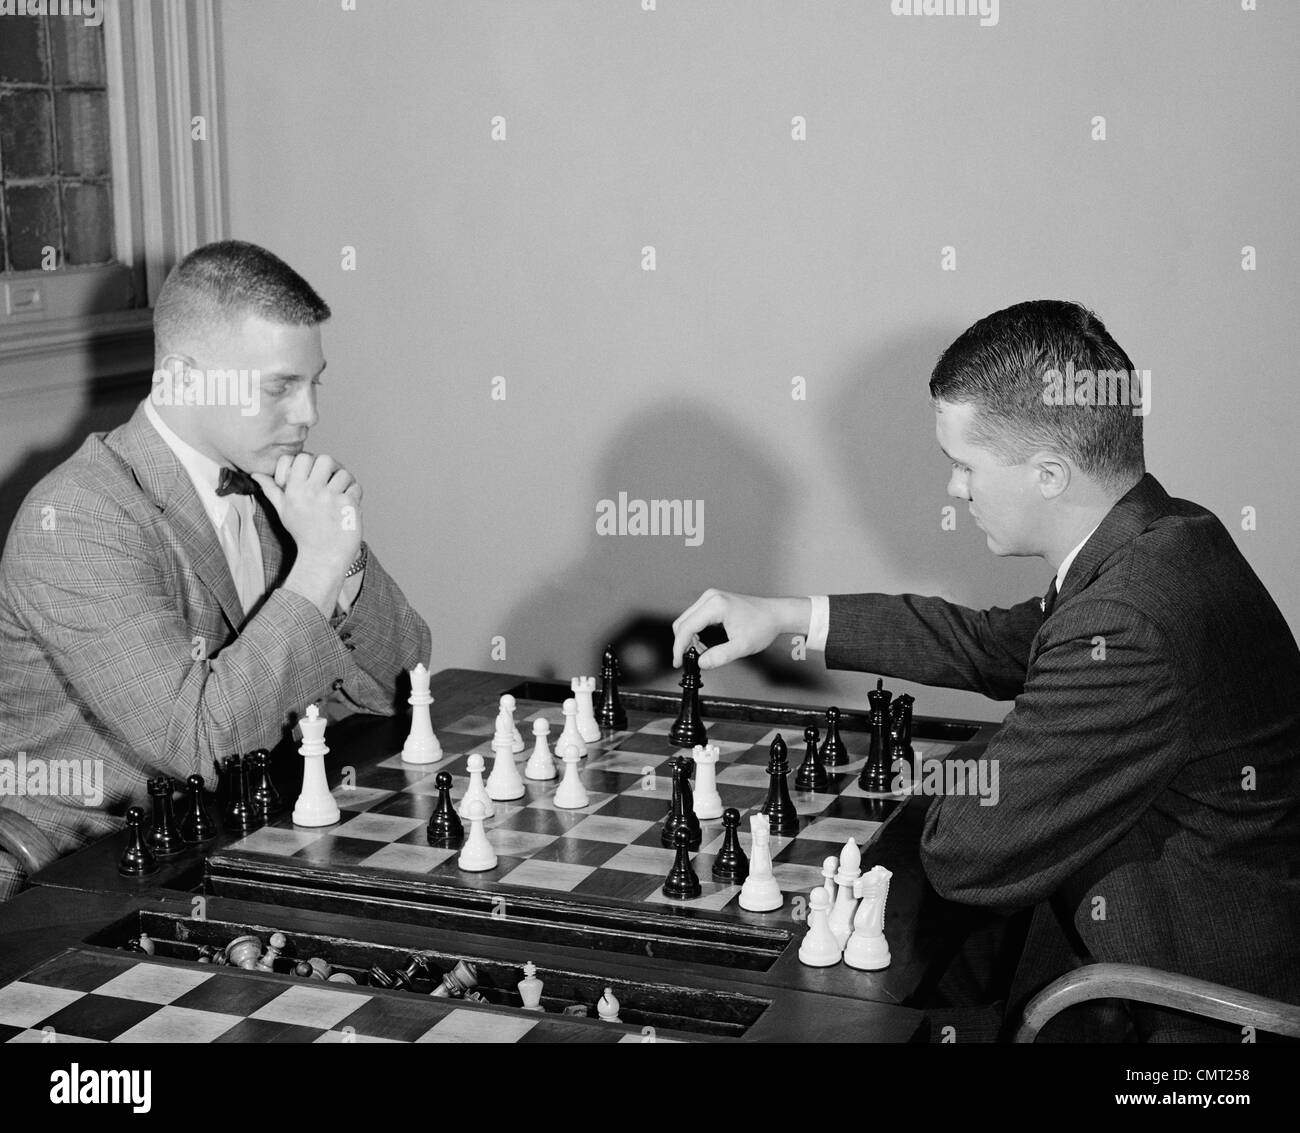 1960s TWO MEN PLAYING CHESS GAME Stock Photo